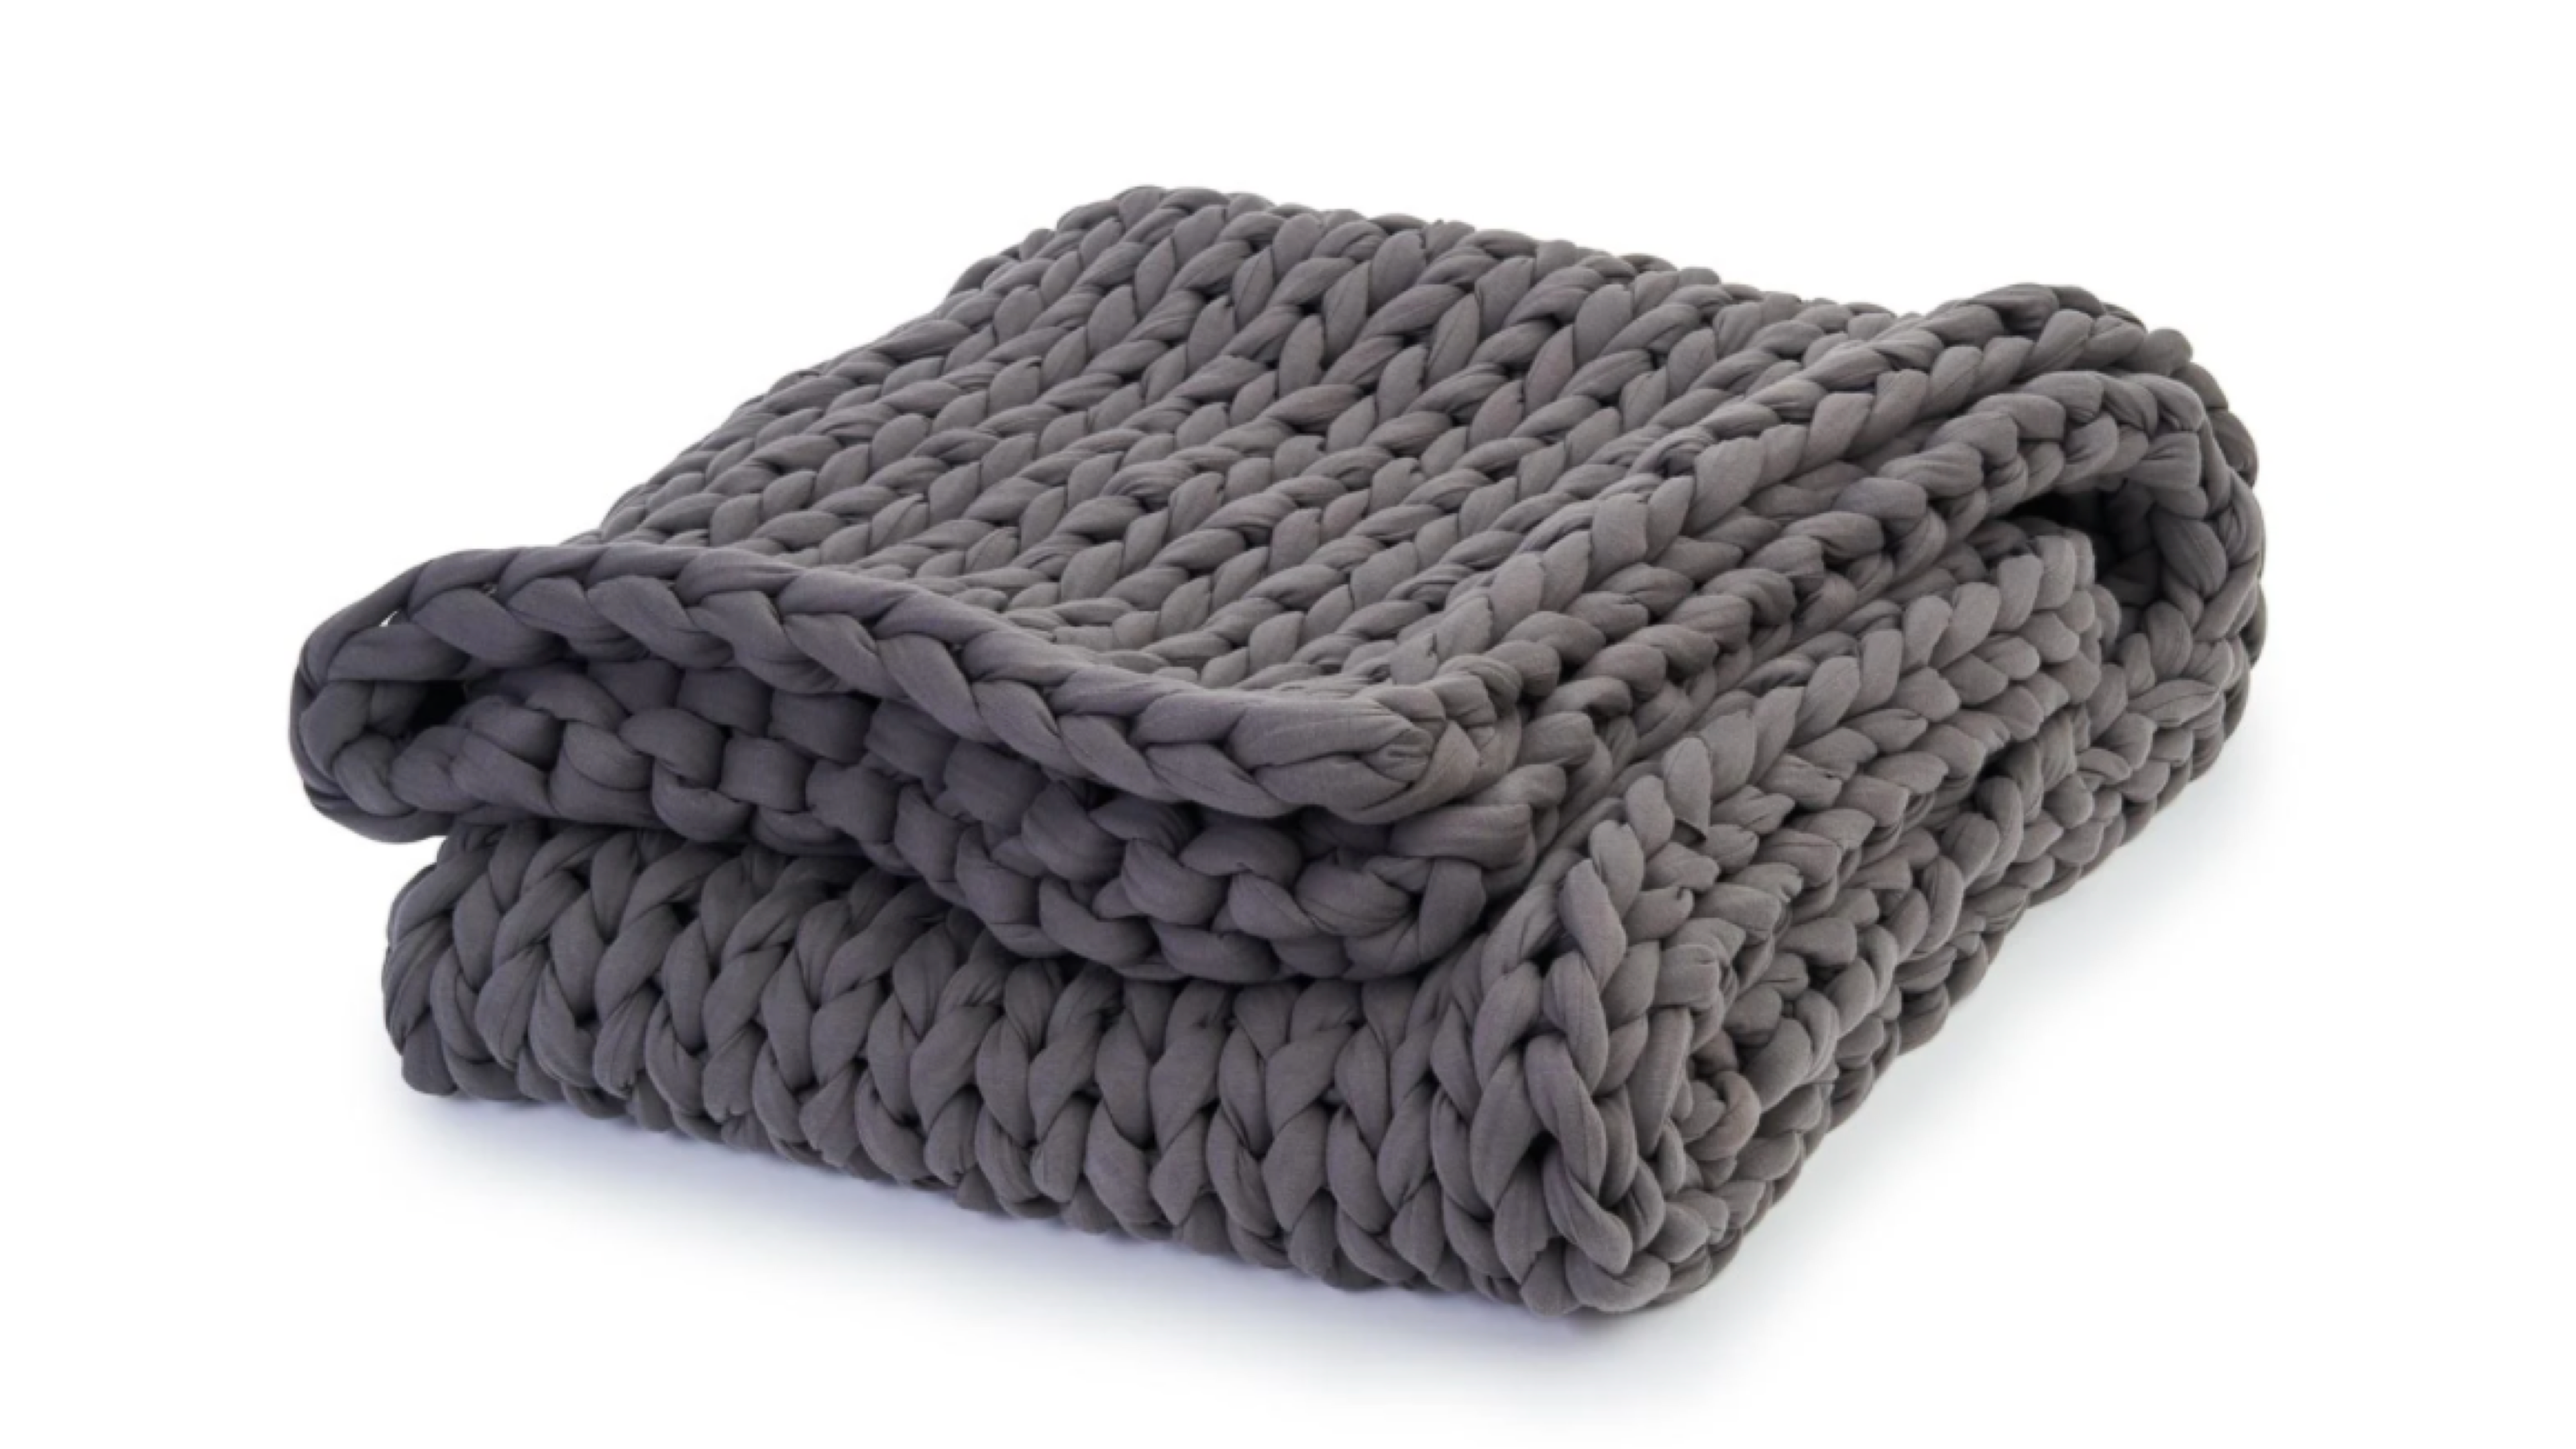 soft cotton knit weighted blanket for a more restful sleep